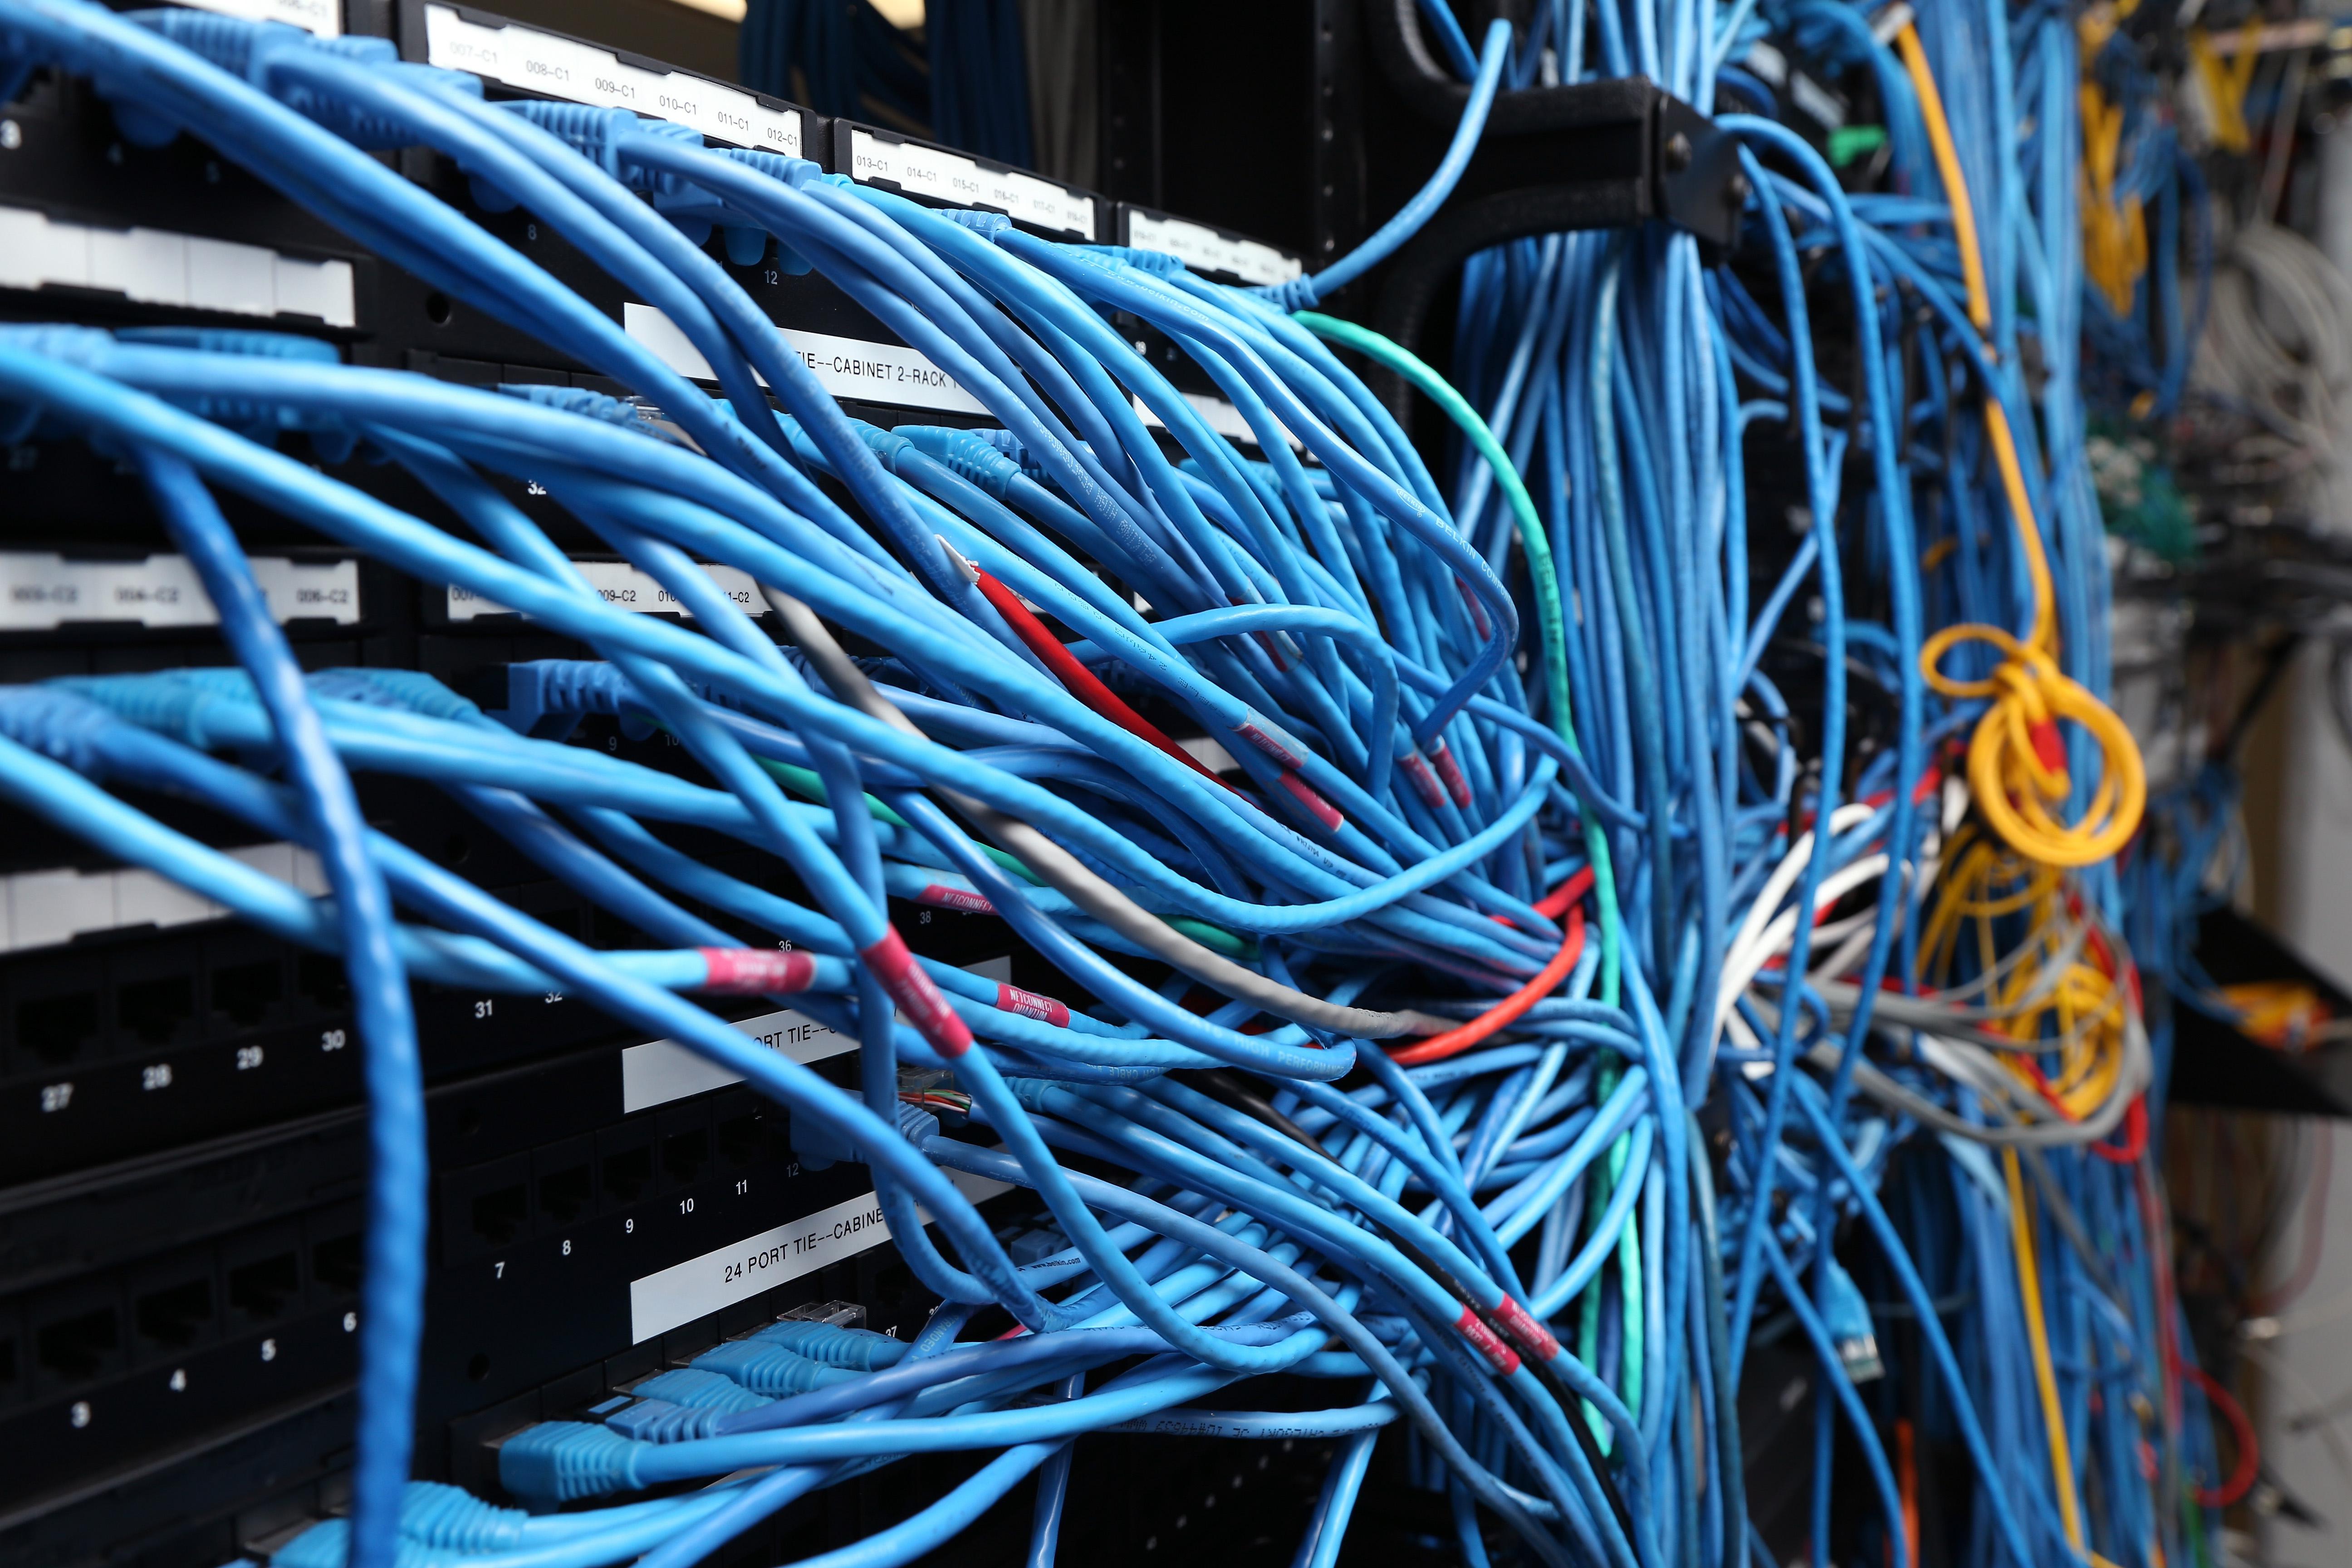 NEW YORK, NY - NOVEMBER 10:  Network cables are plugged in a server room on November 10, 2014 in New York City. U.S. President Barack Obama called on the Federal Communications Commission to implement a strict policy of net neutrality and to oppose content providers in restricting bandwith to customers.  (Photo by Michael Bocchieri/Getty Images)